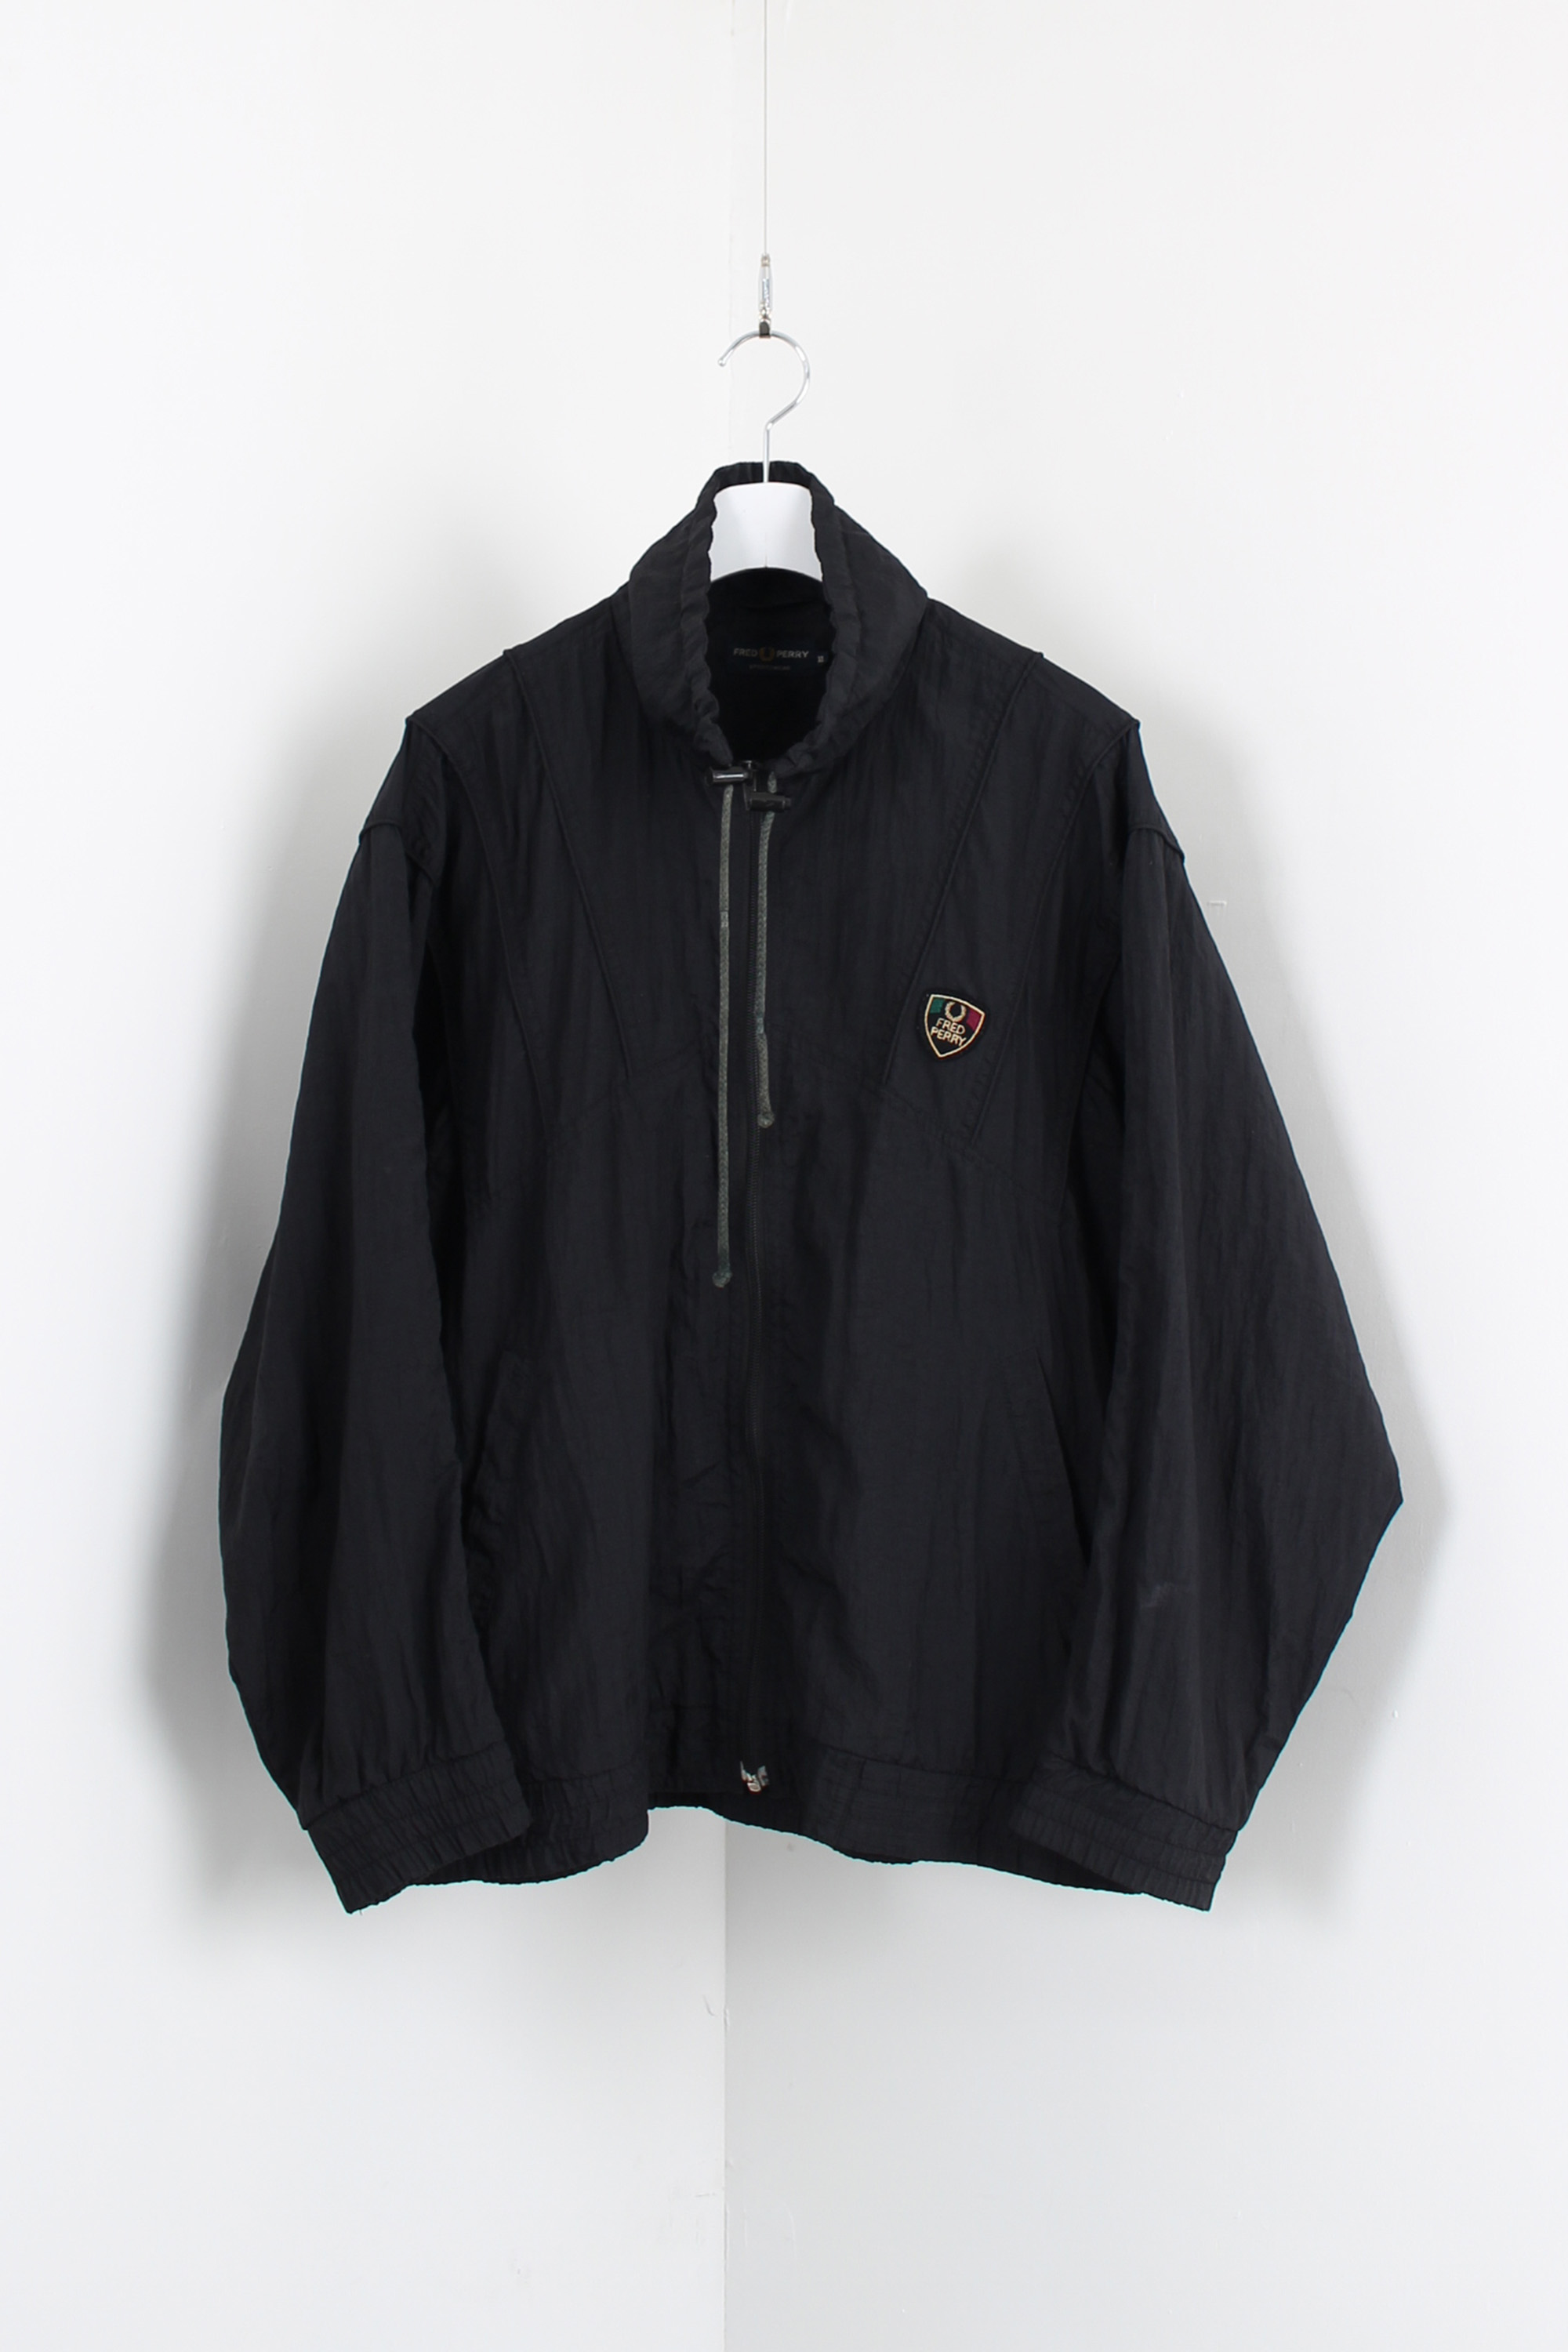 FRED PERRY patch logo jacket